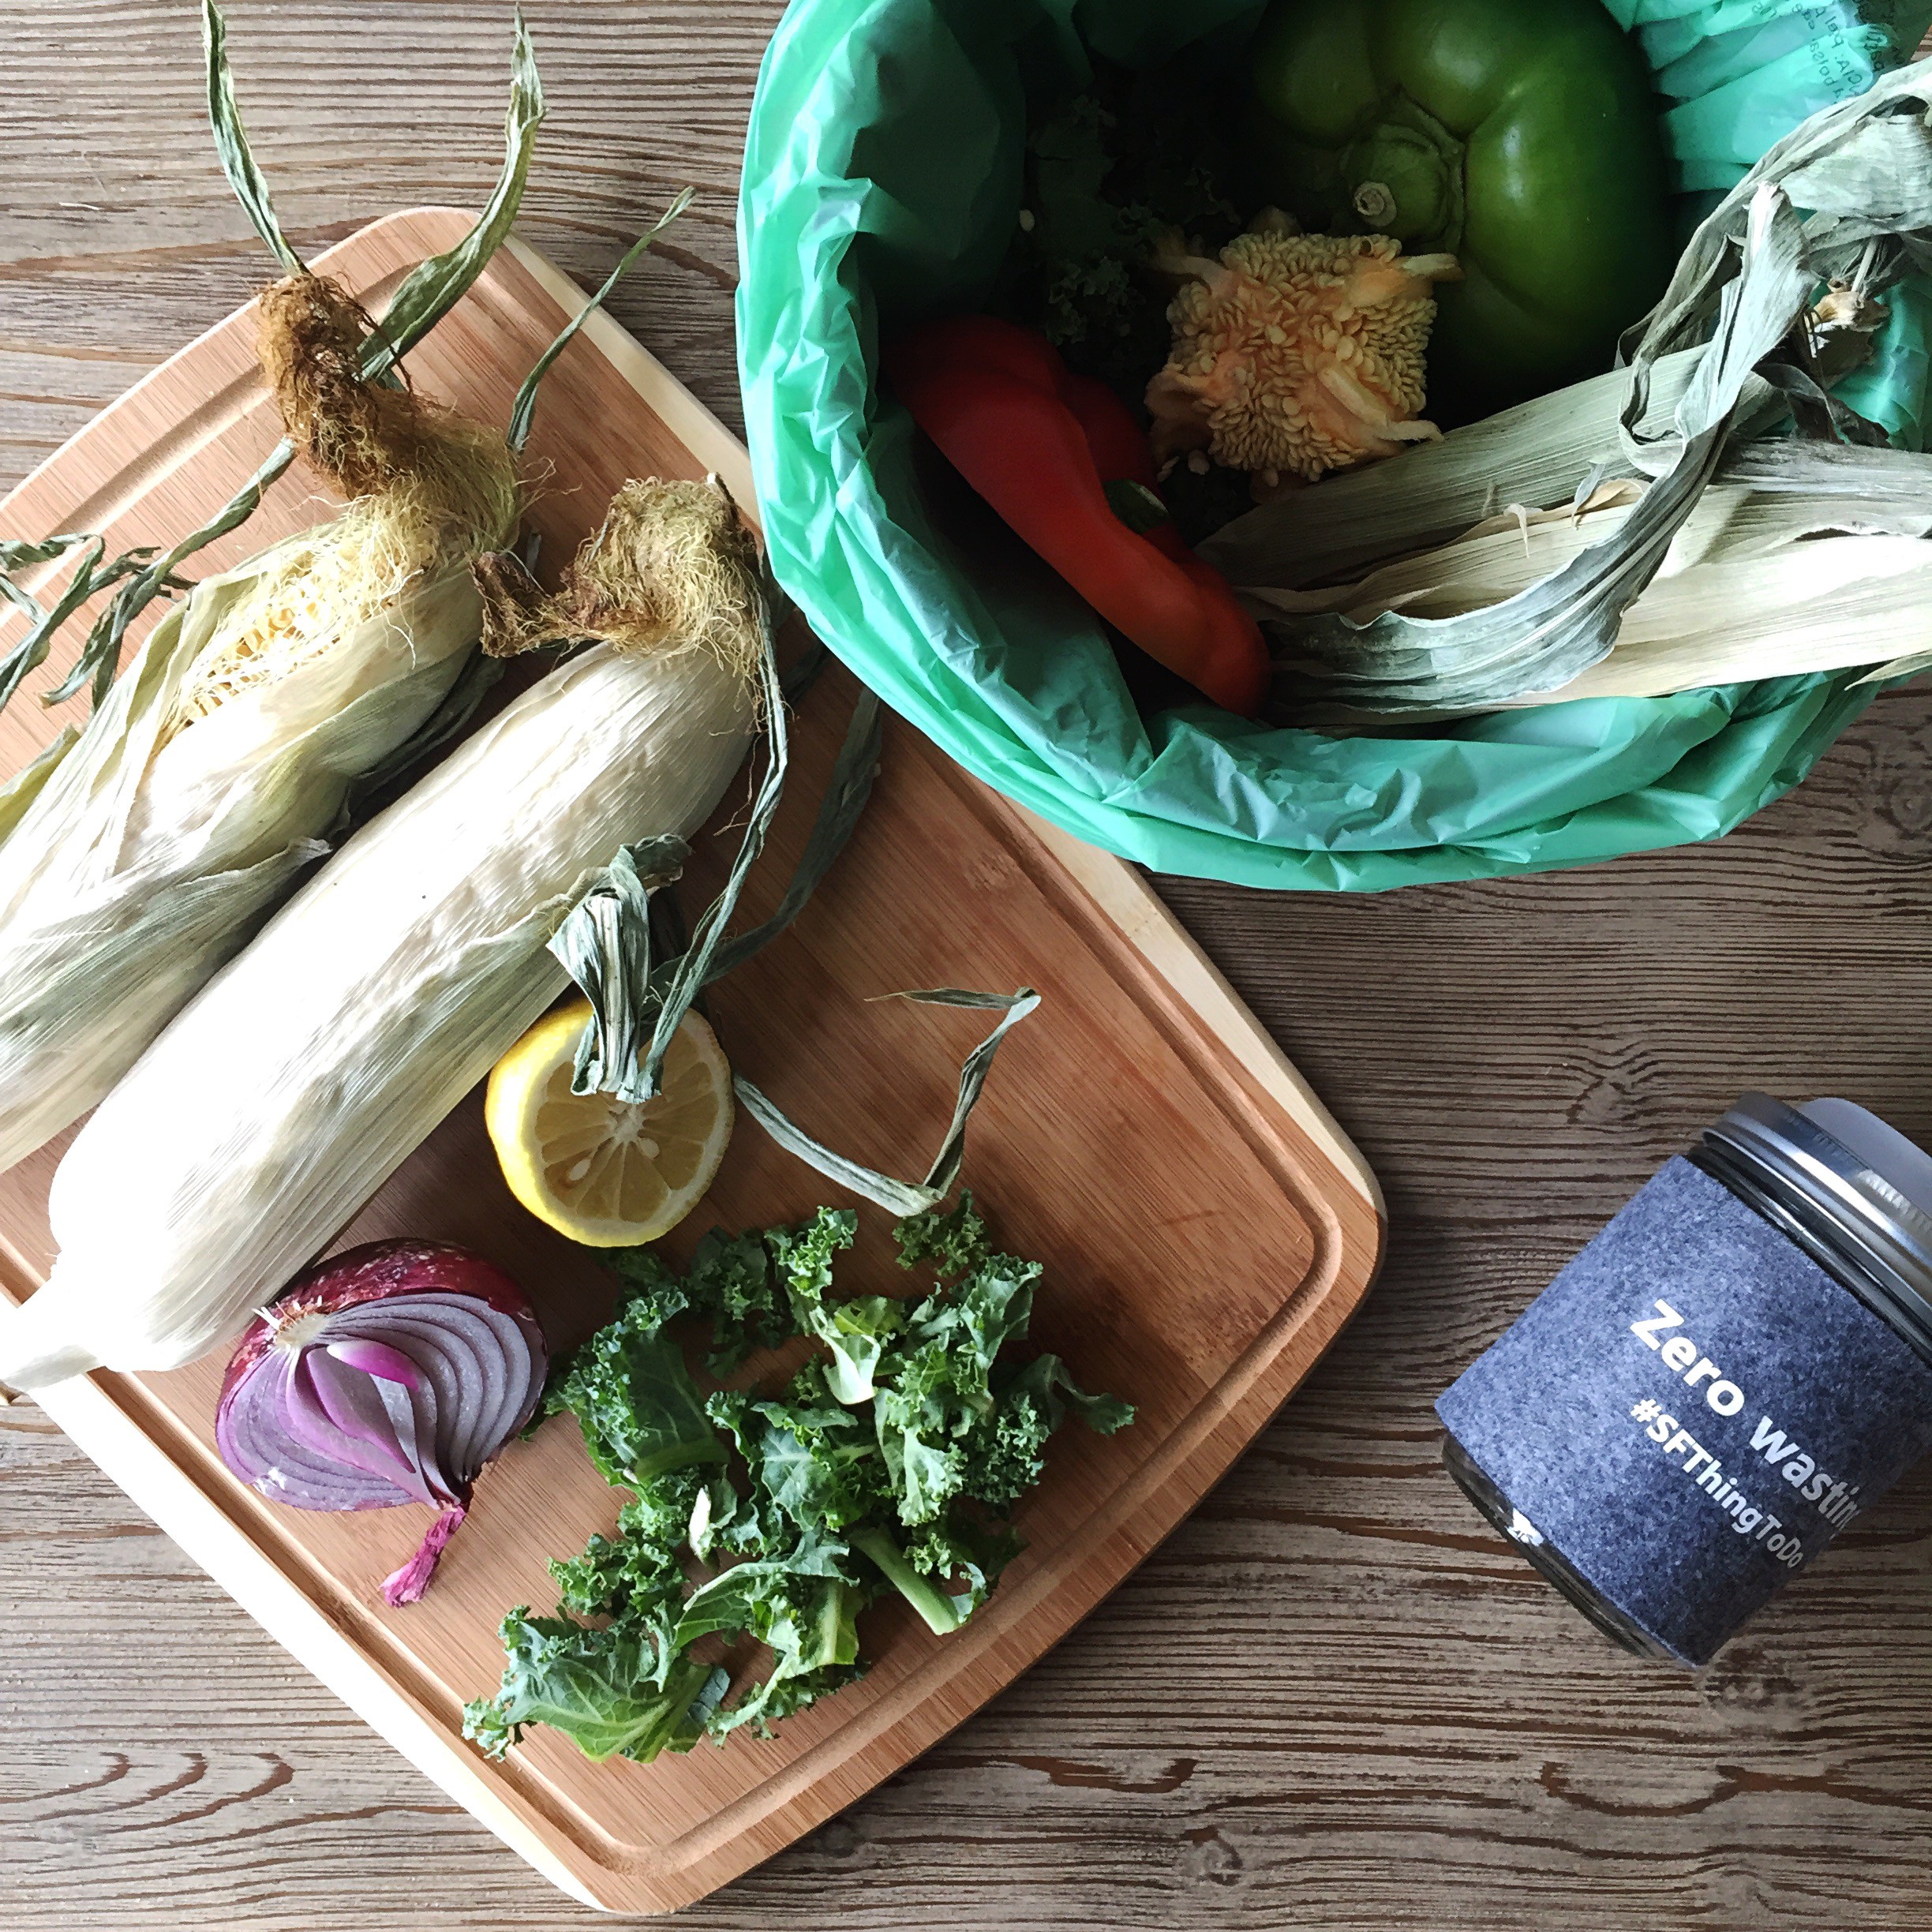 A cutting board with corn husks and kale on top and a compost pail close by for the food scraps